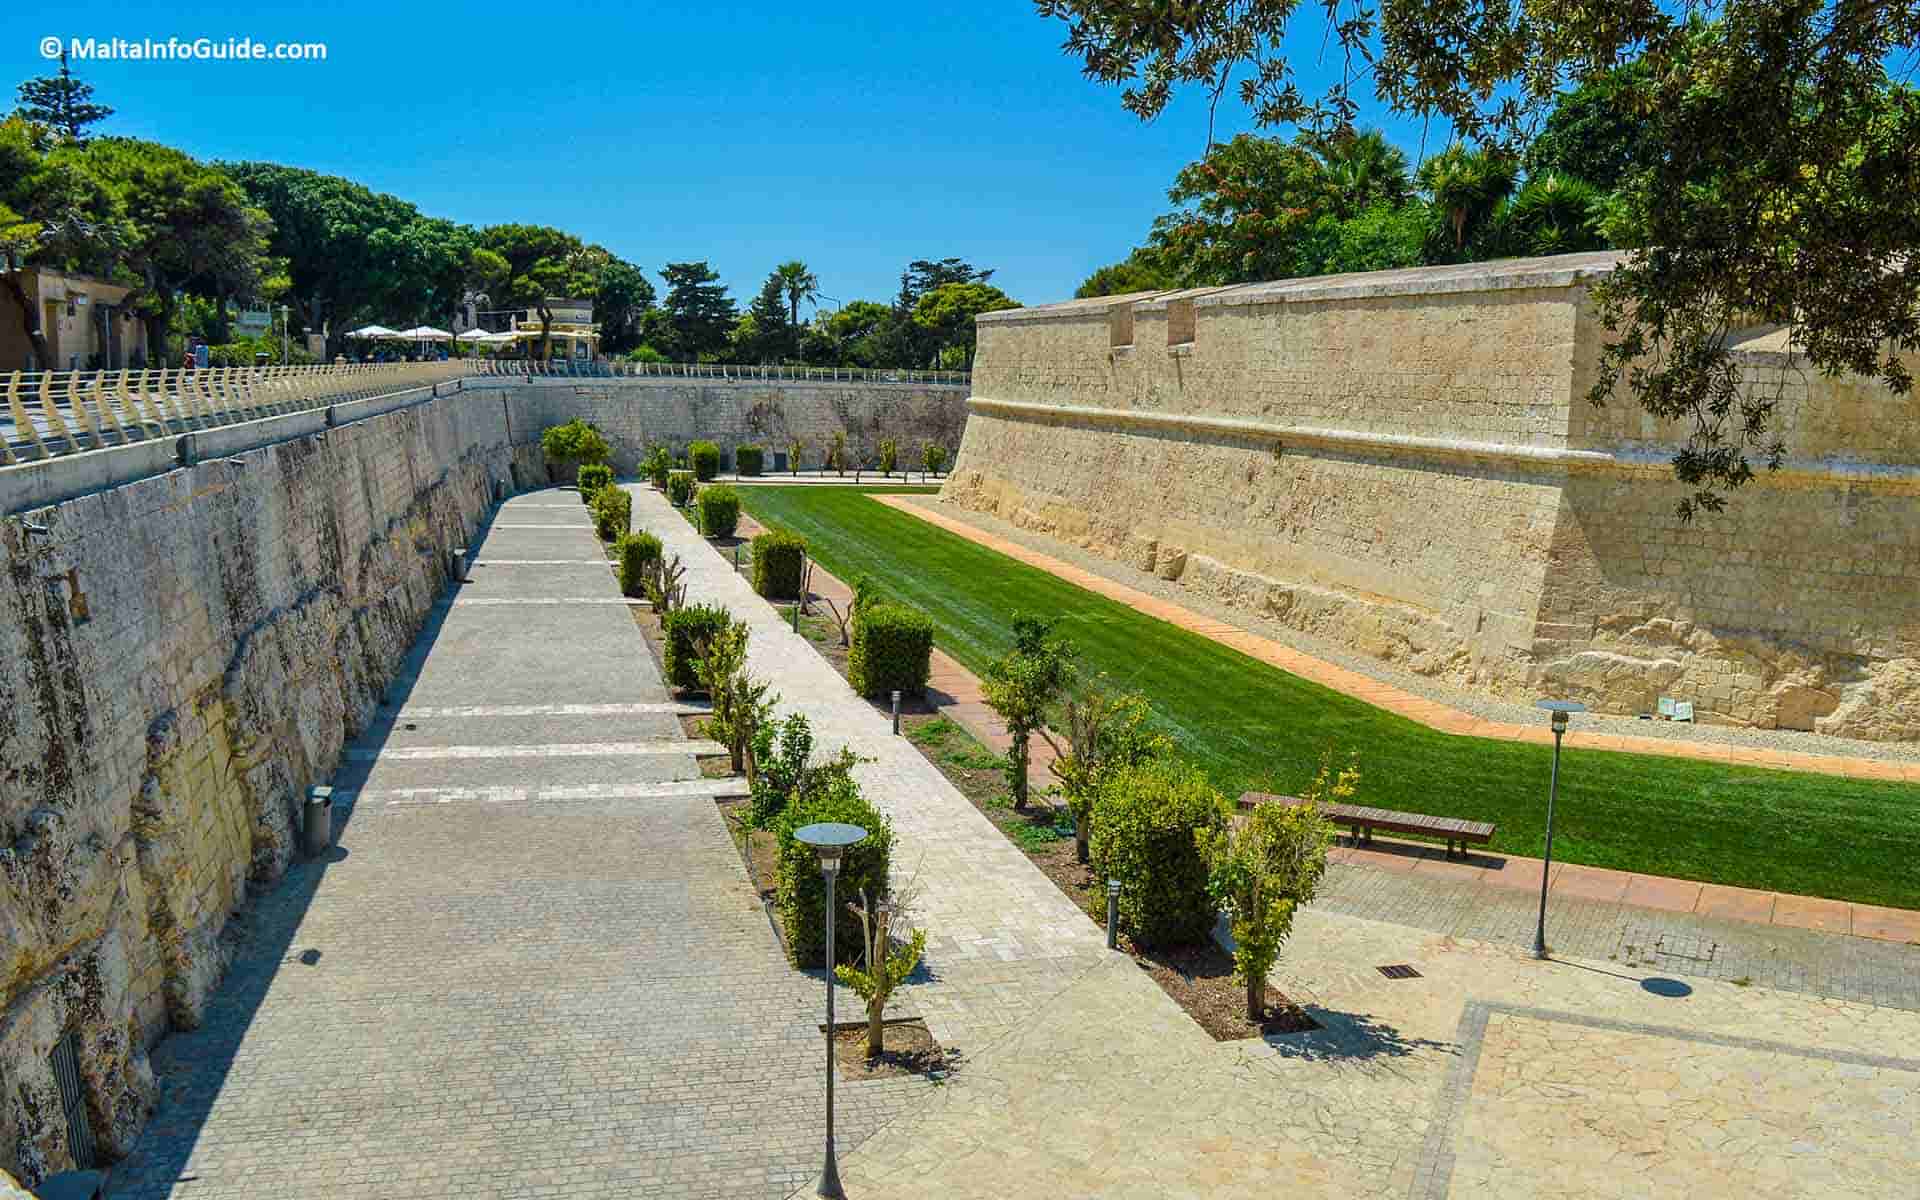 The ditch garden separating Rabat from Mdina.